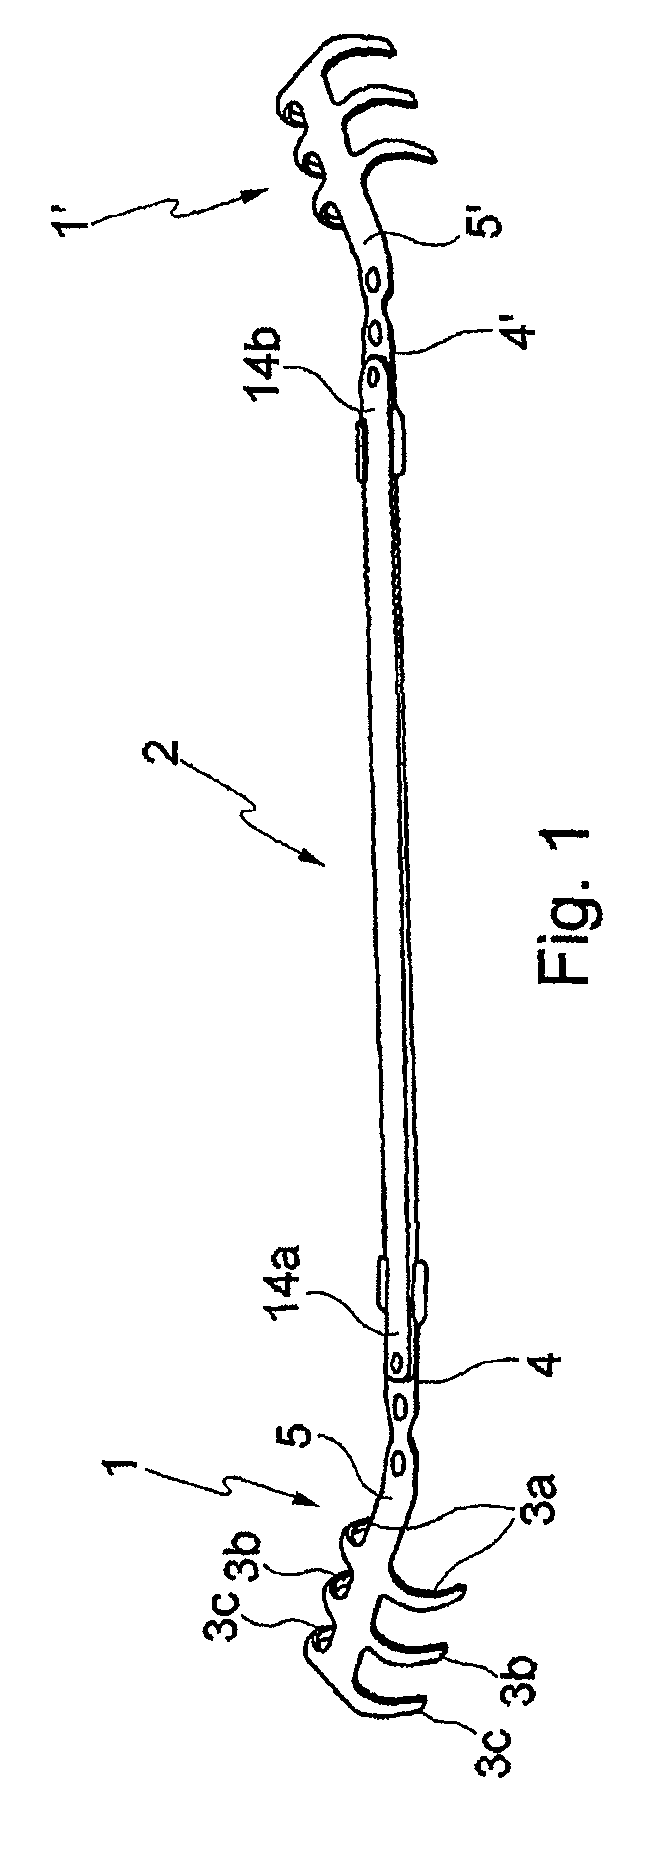 Implant, implant system, and use of an implant and implant system